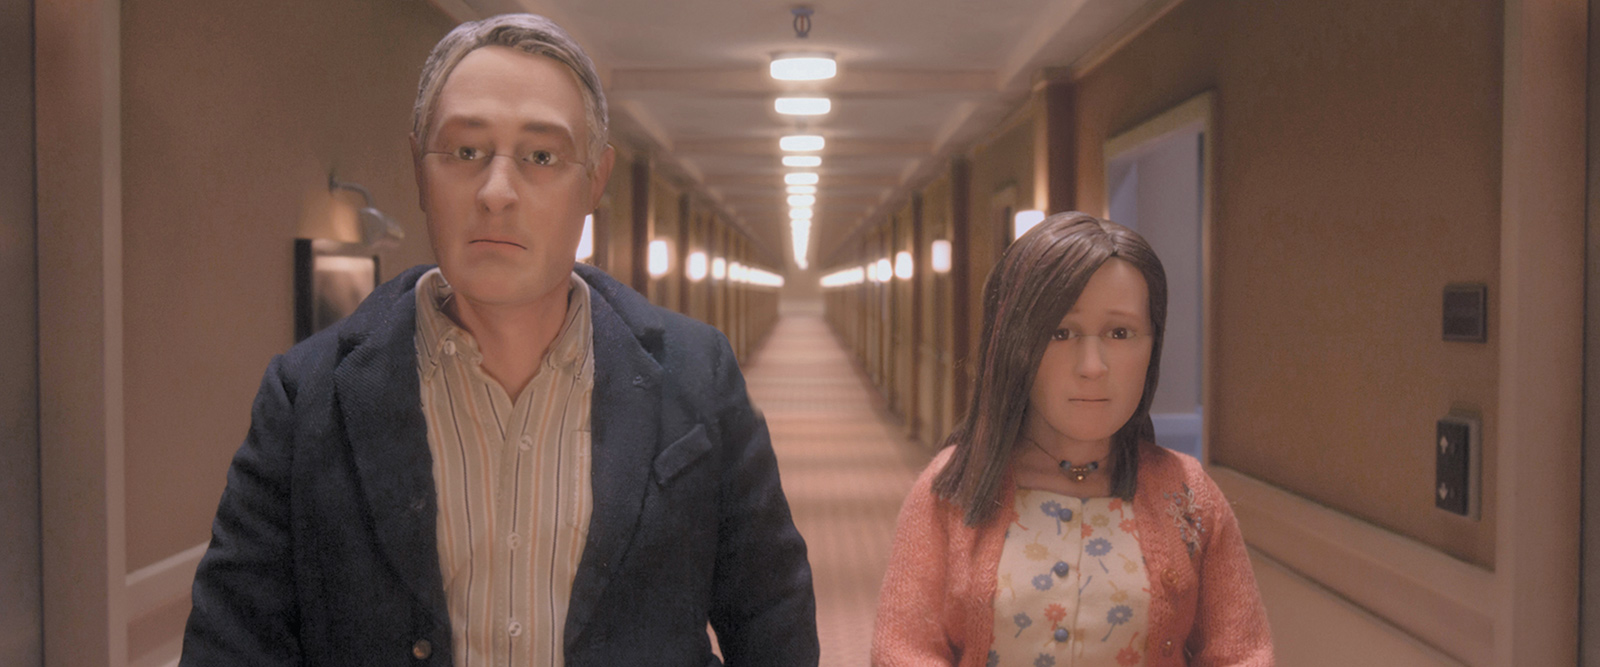 Michael and Lisa, voiced by David Thewlis and Jennifer Jason Leigh, in the stop-motion animated film Anomalisa